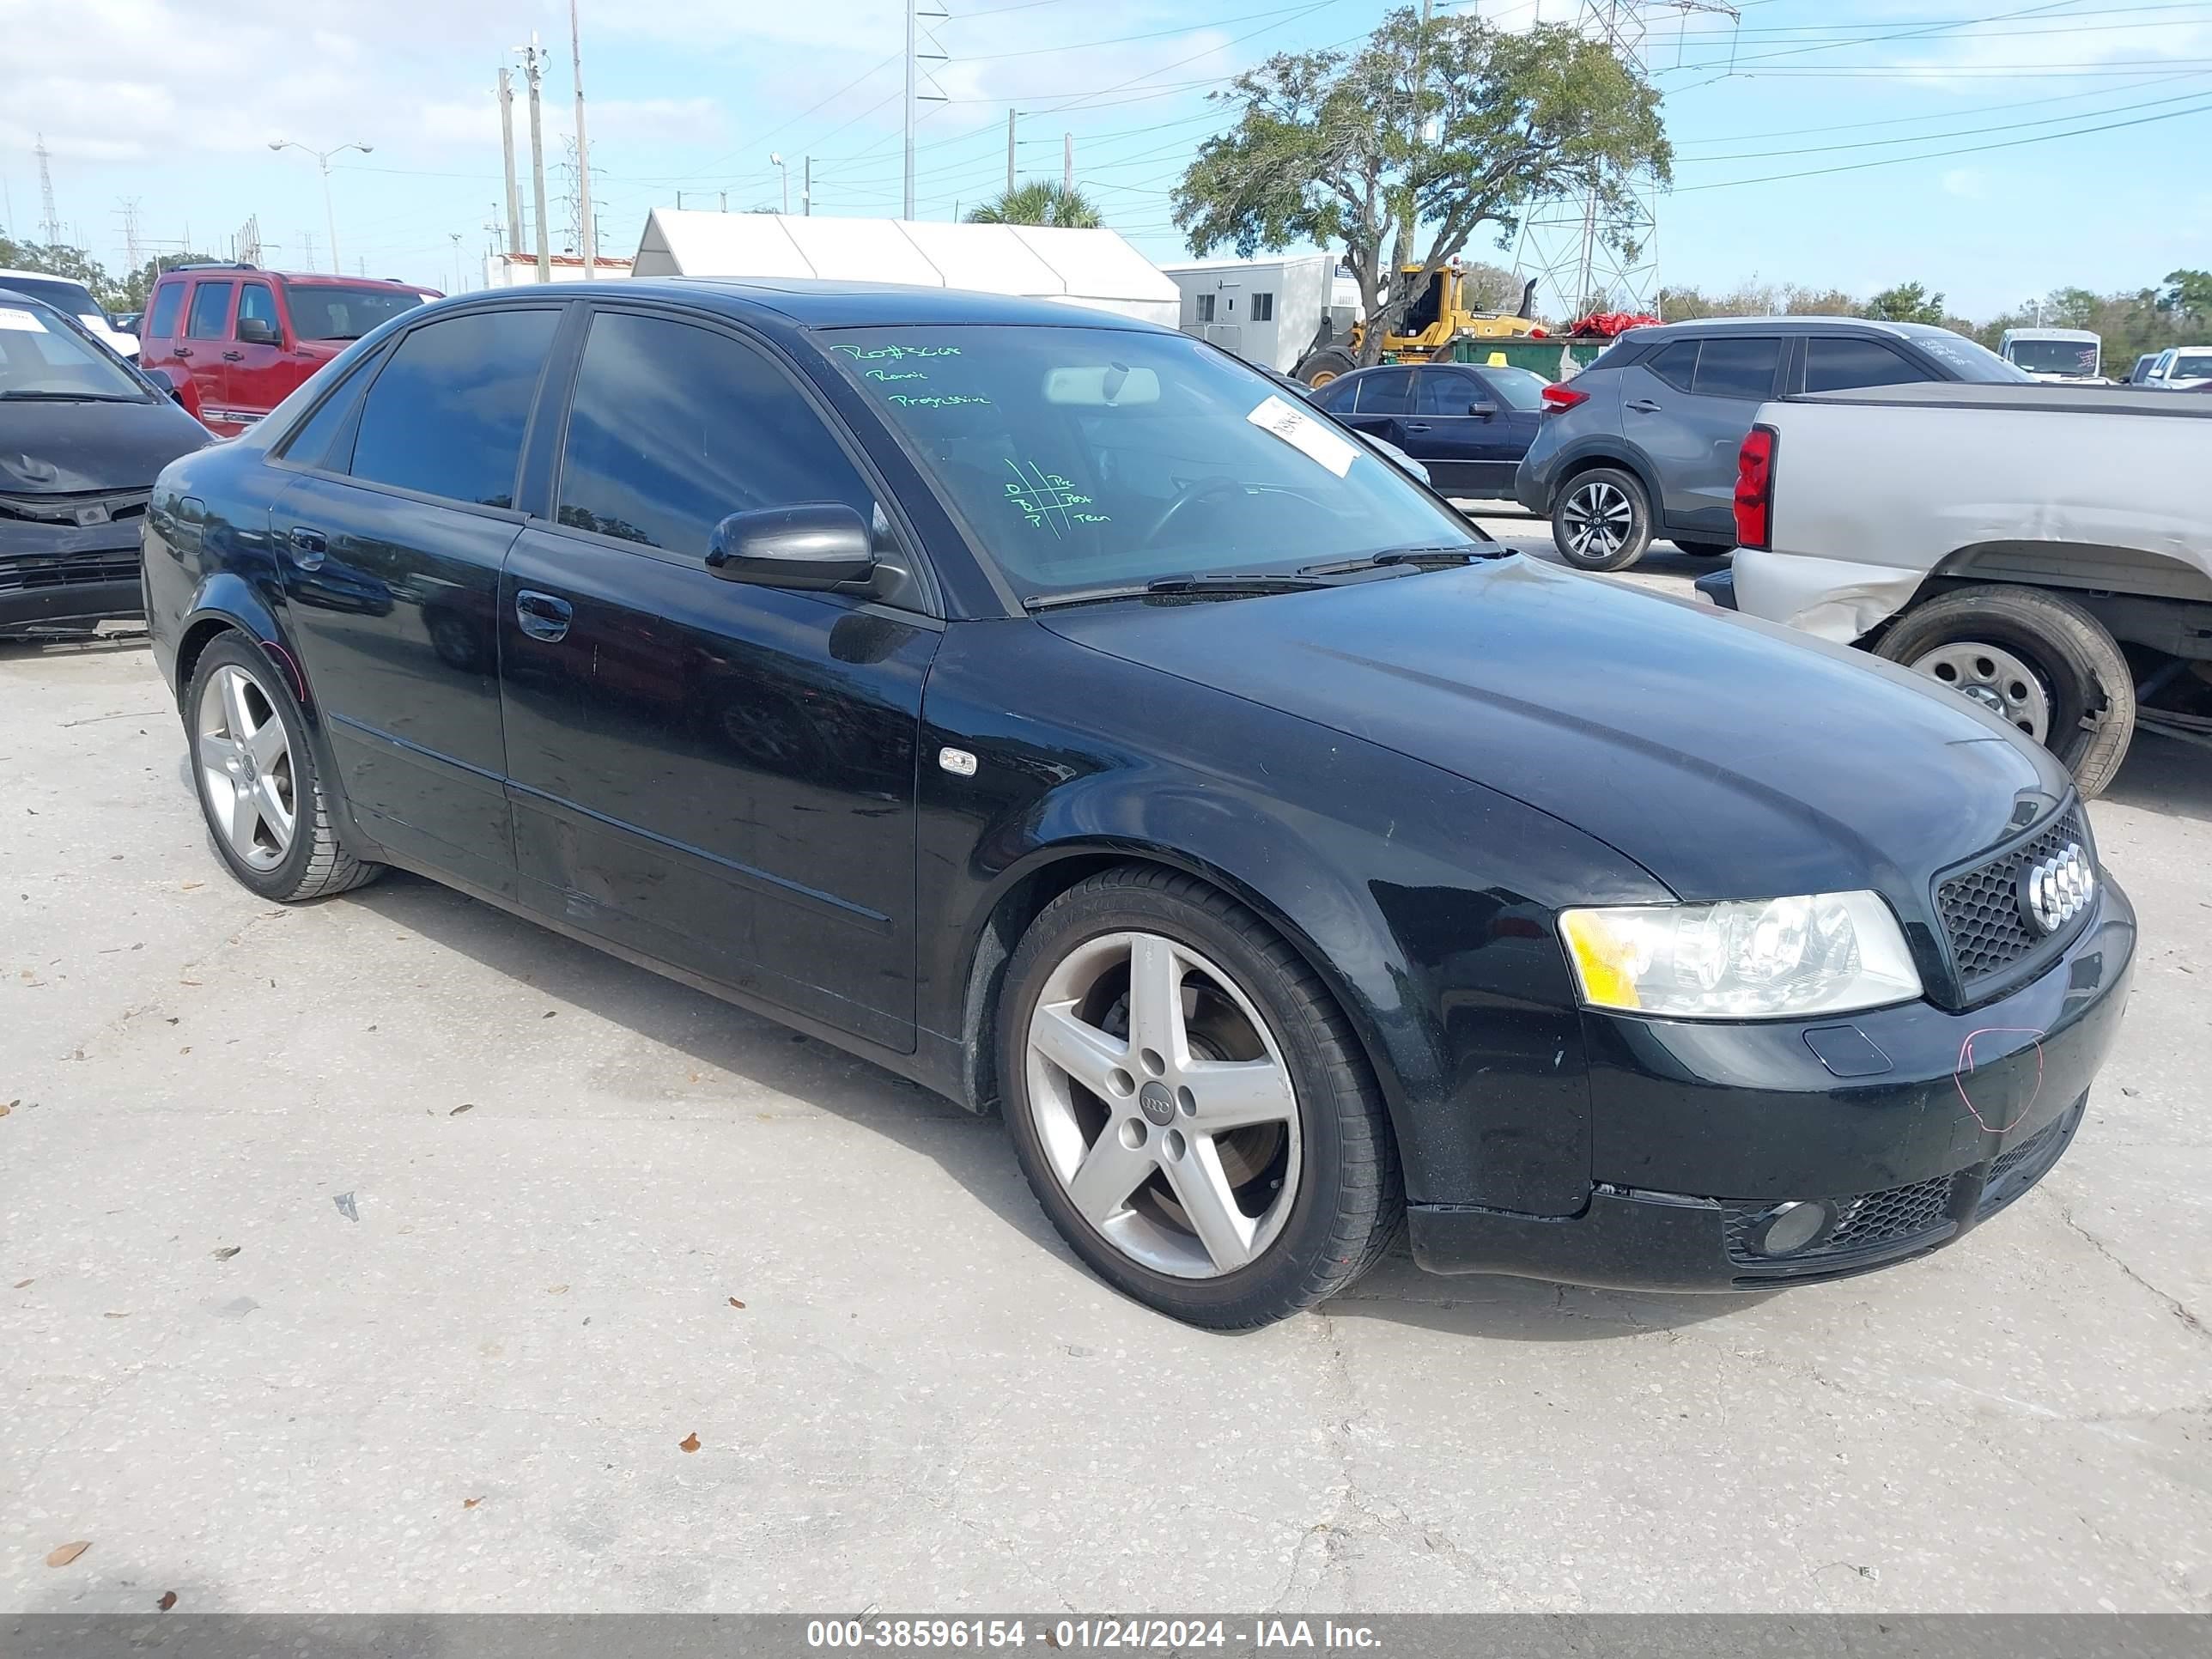 vin: WAUJC68E54A282437 WAUJC68E54A282437 2004 audi a4 1800 for Sale in 33760, 5152 126Th Ave N, Clearwater, USA